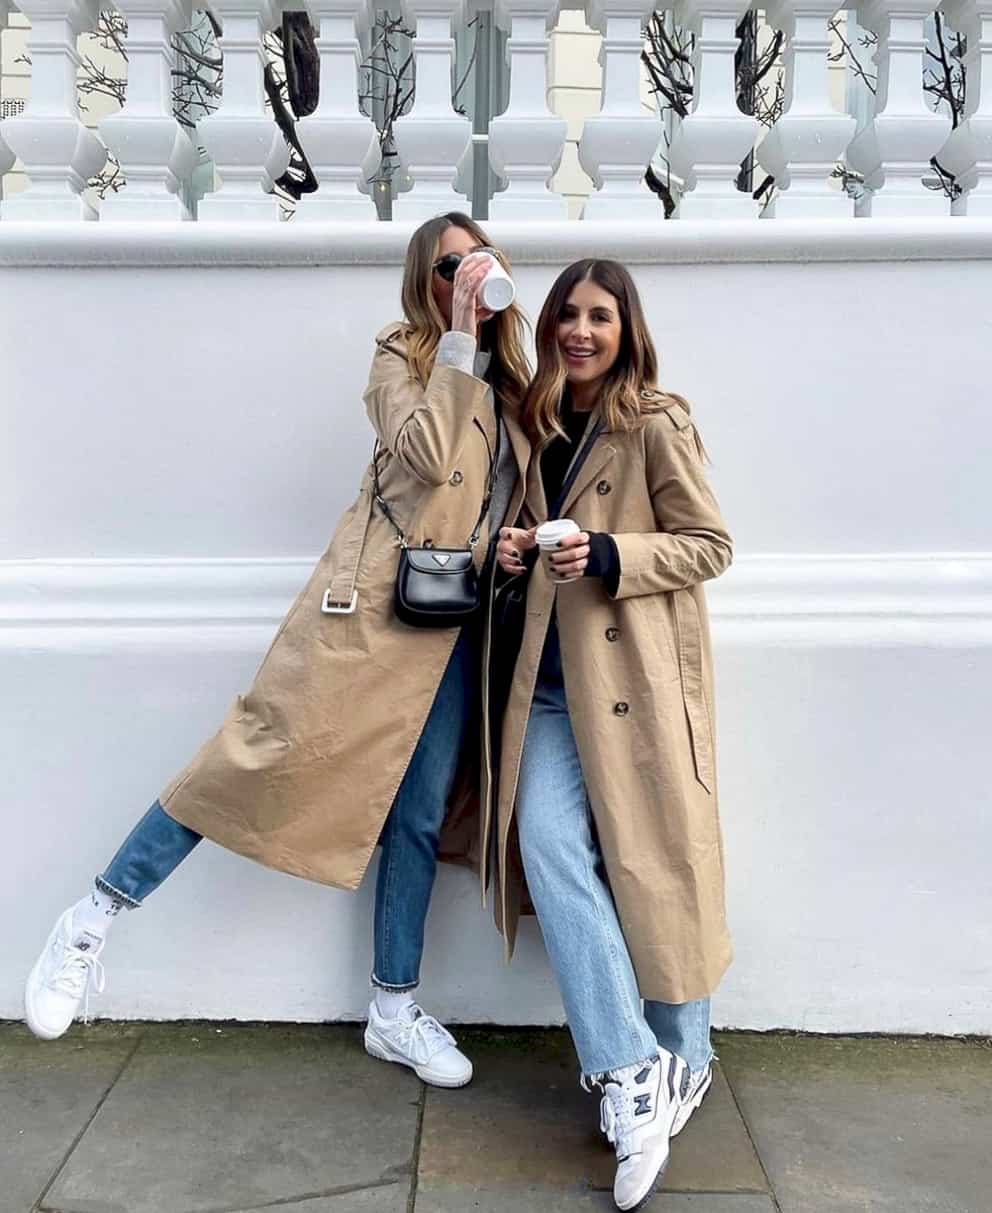 two stylish women wearing tan trench coats, jeans, and New Balance 550 sneakers